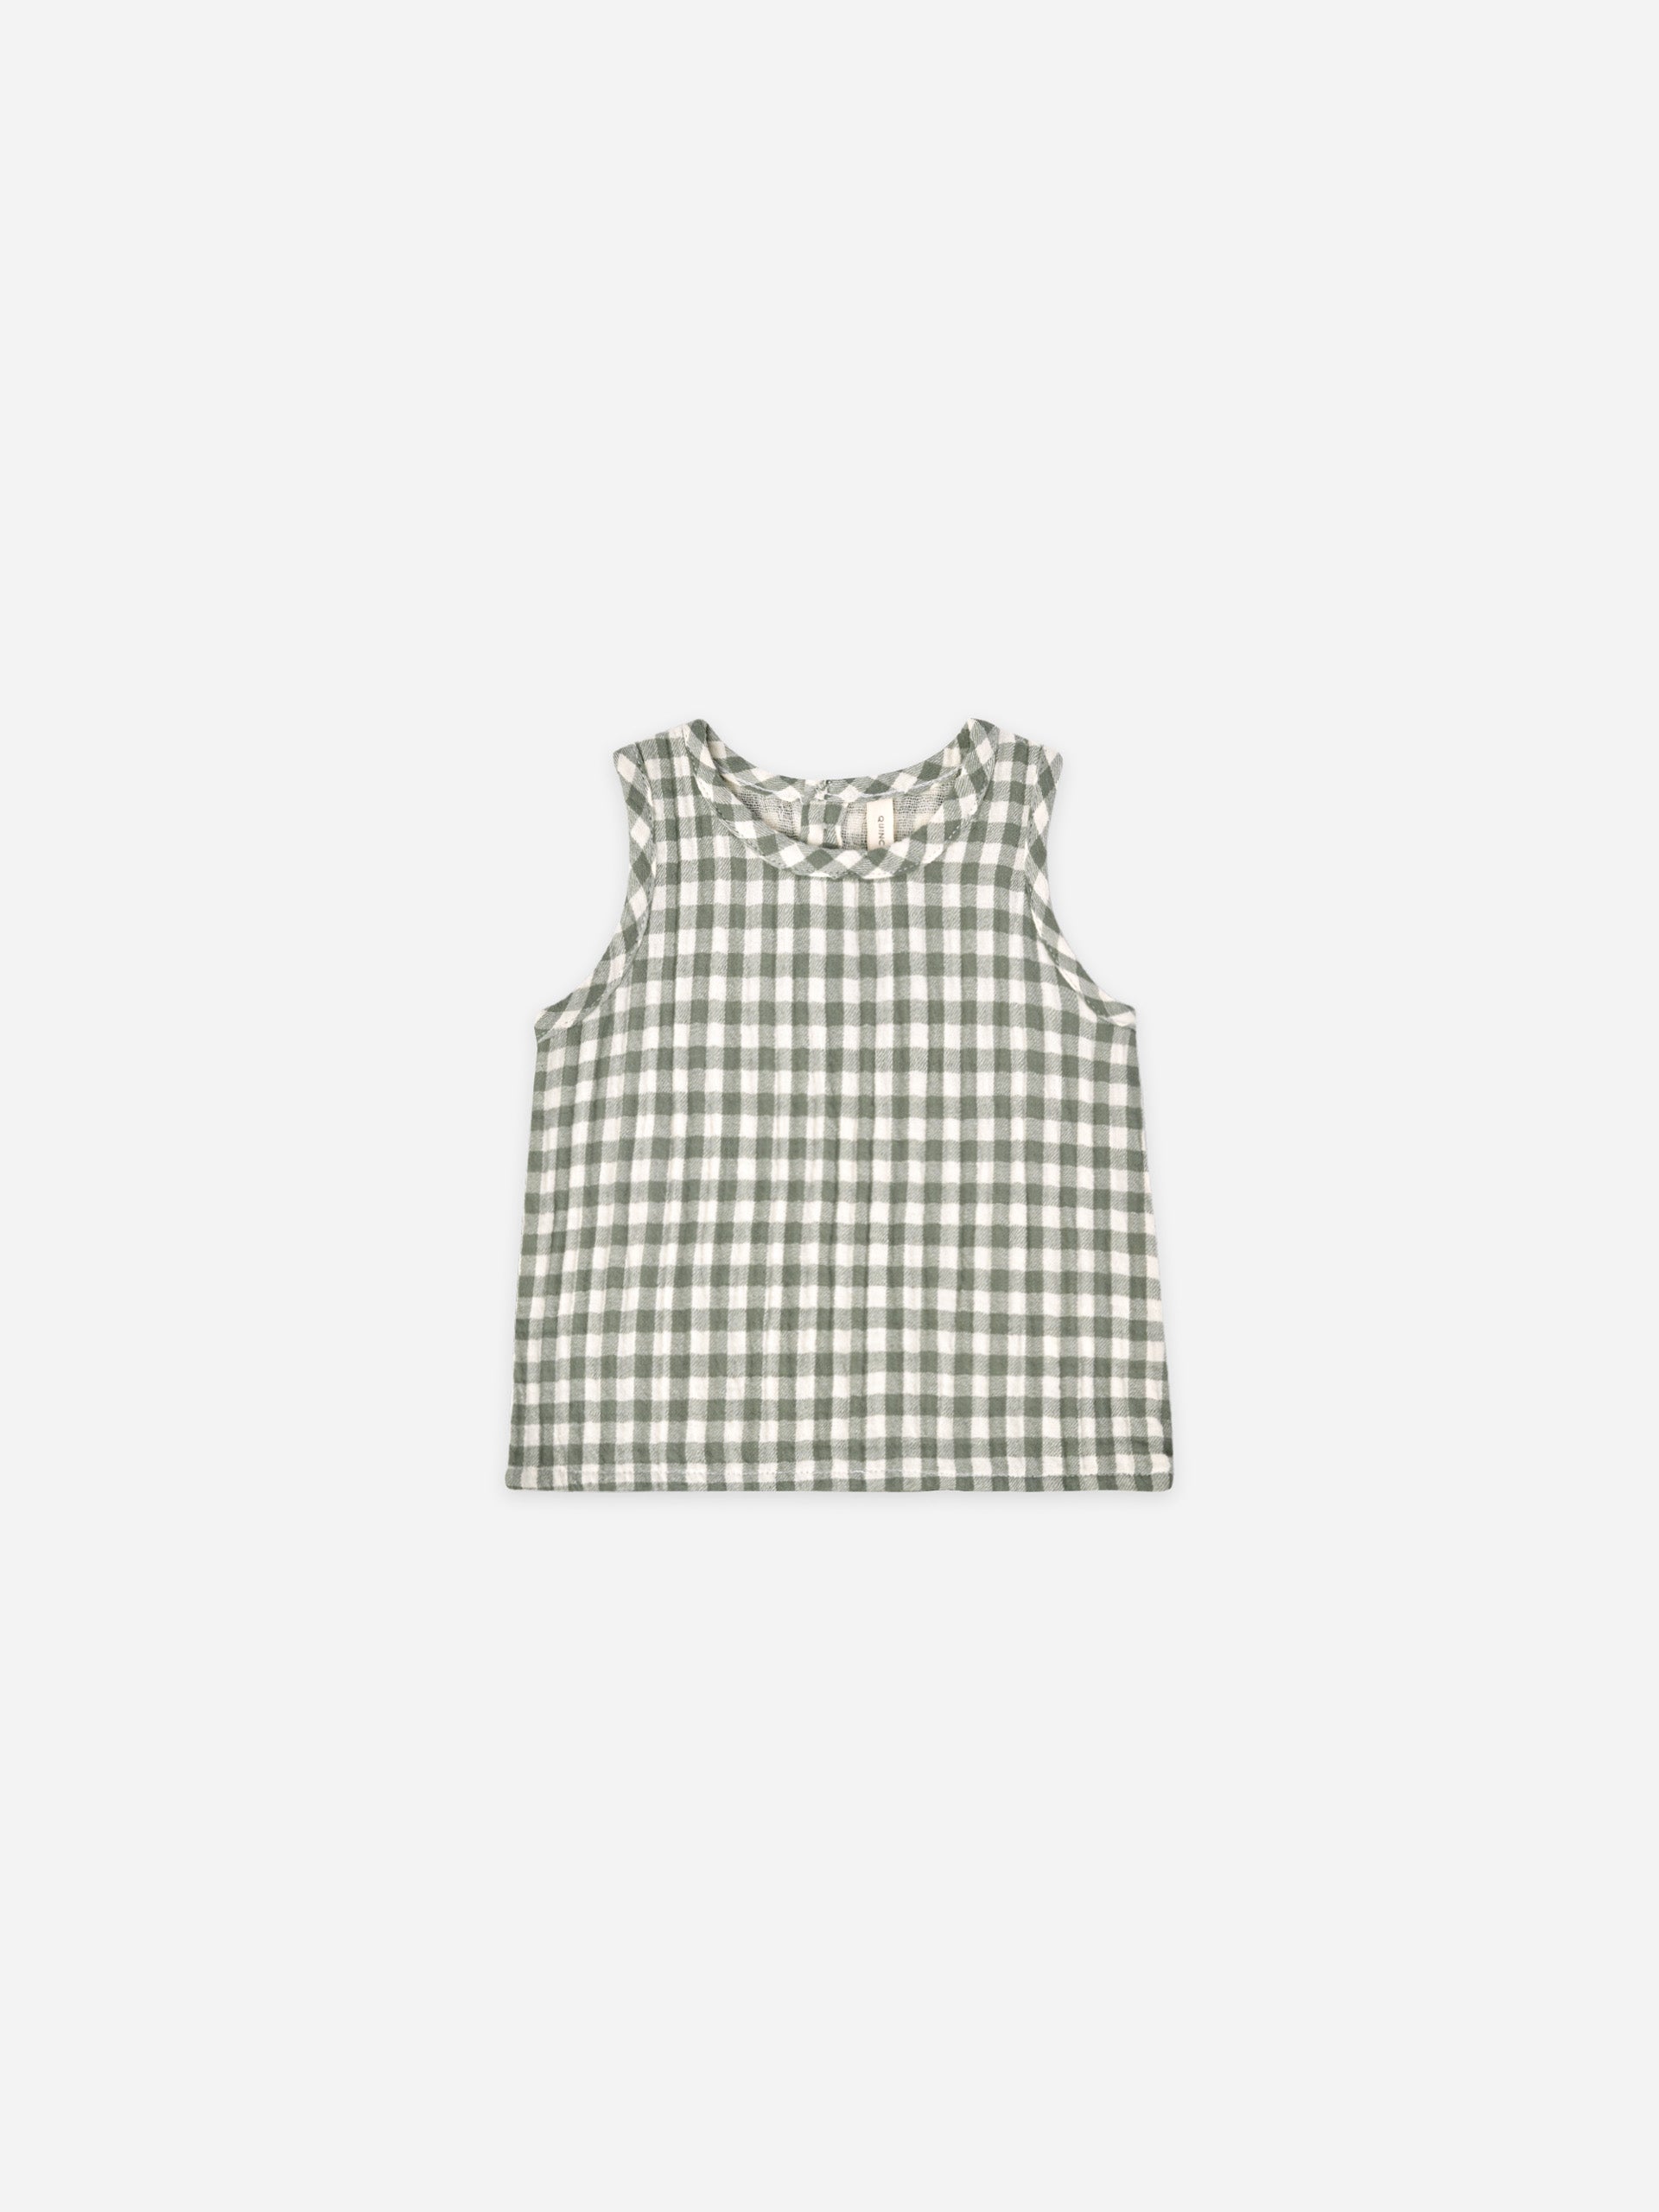 woven tank | sea green gingham - Quincy Mae | Baby Basics | Baby Clothing | Organic Baby Clothes | Modern Baby Boy Clothes |